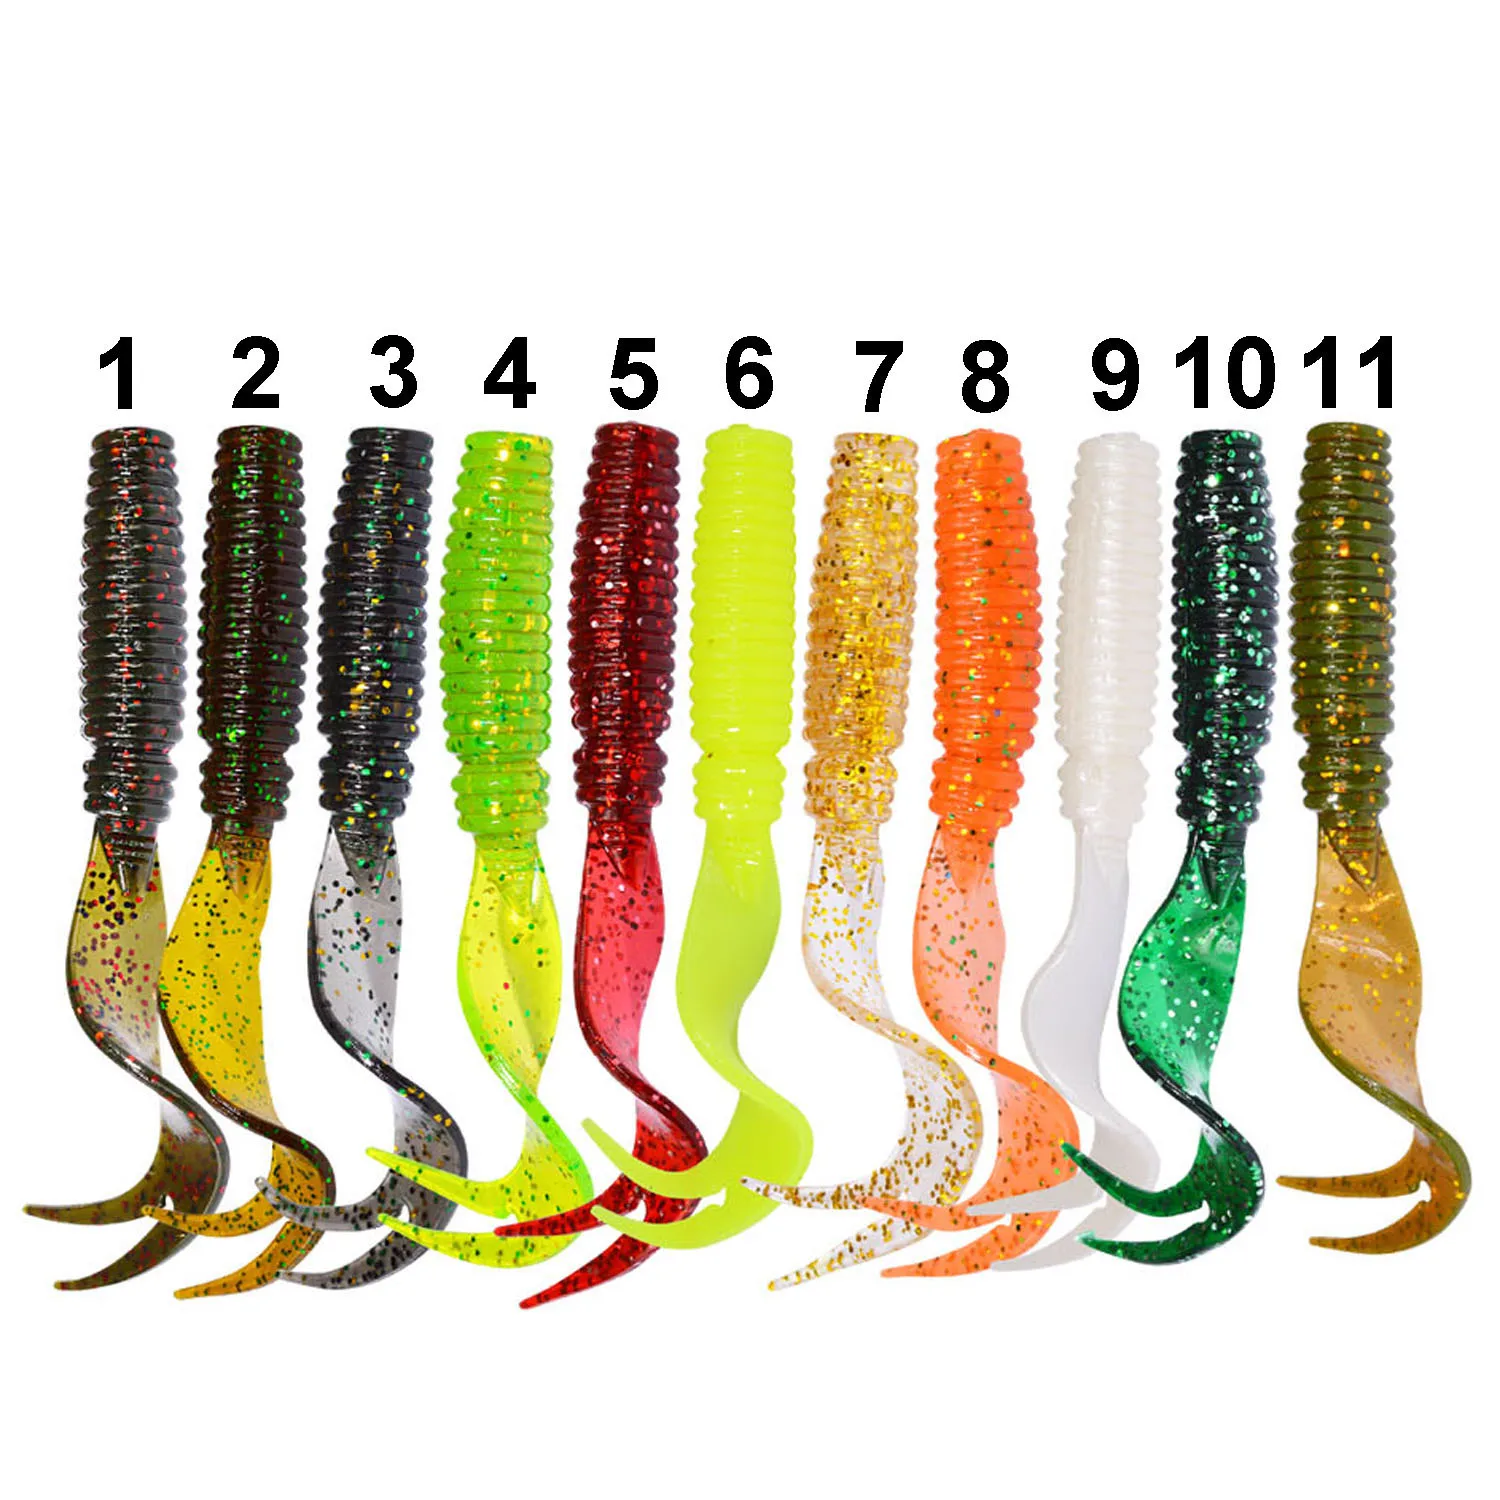 

Afishlure soft bait 75mm 3.3g soft plastic grub lure fishing baits curl tail artificial bass lure fishing tackle, 11 colors